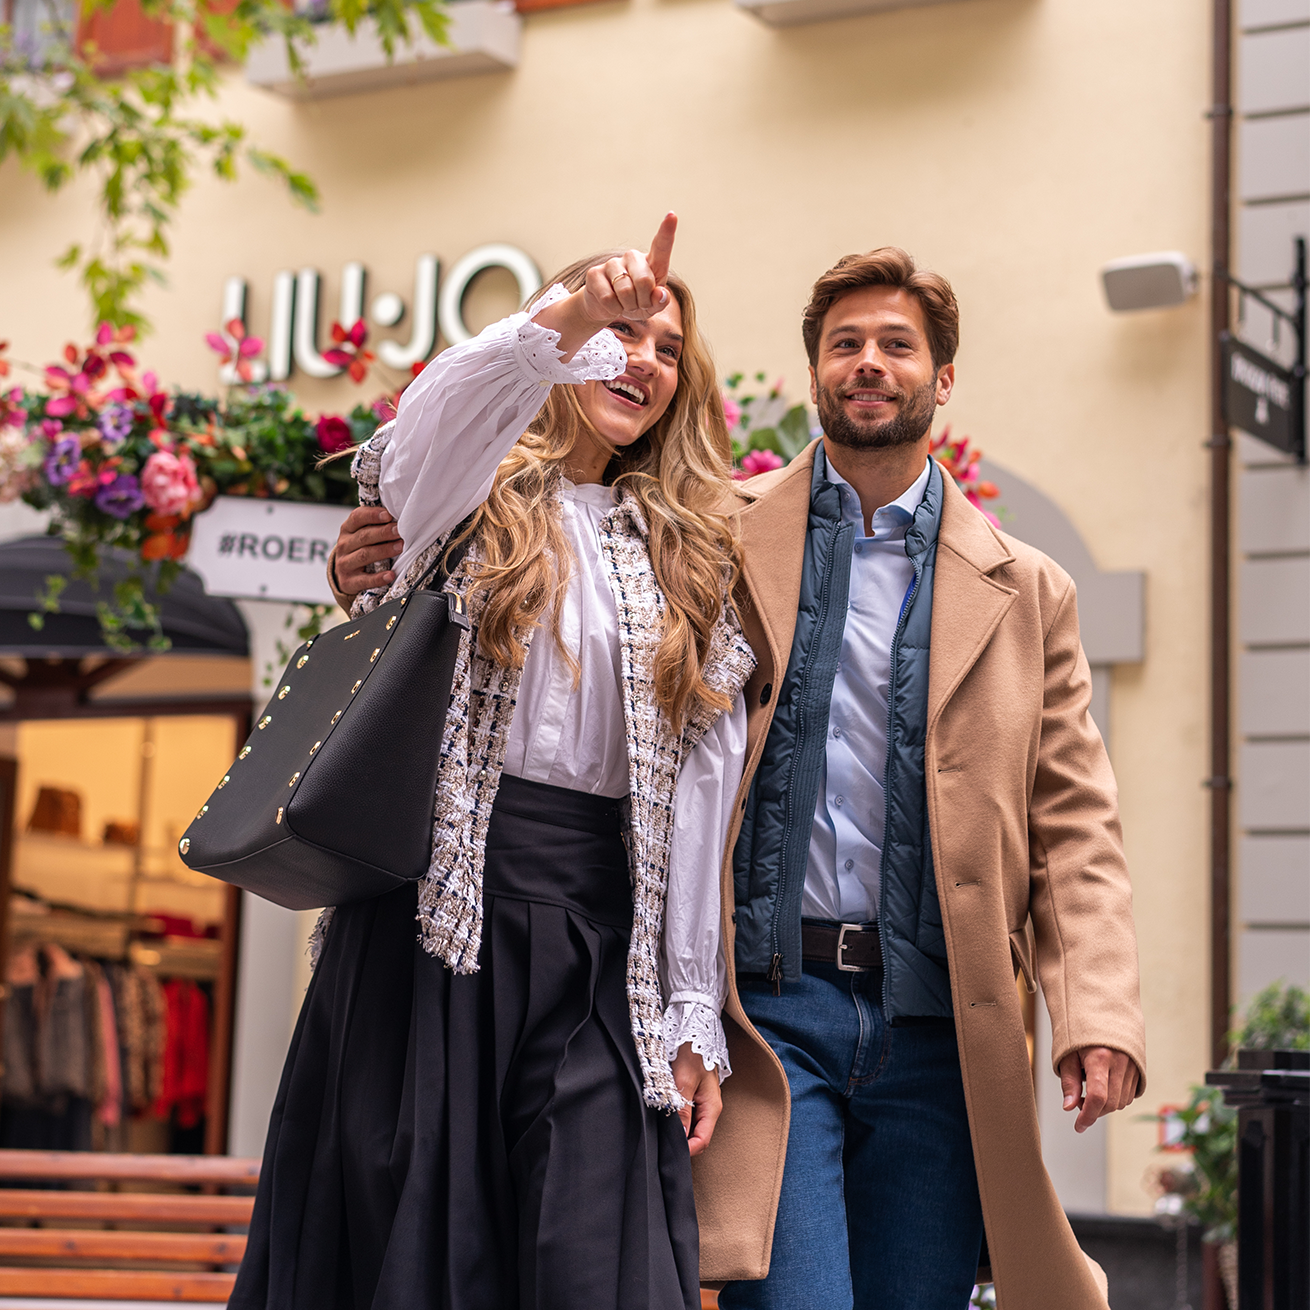 Designer Outlet Roermond - What brands would you like to see in Designer Outlet  Roermond? ✨ Let us know in the comments below ⬇️